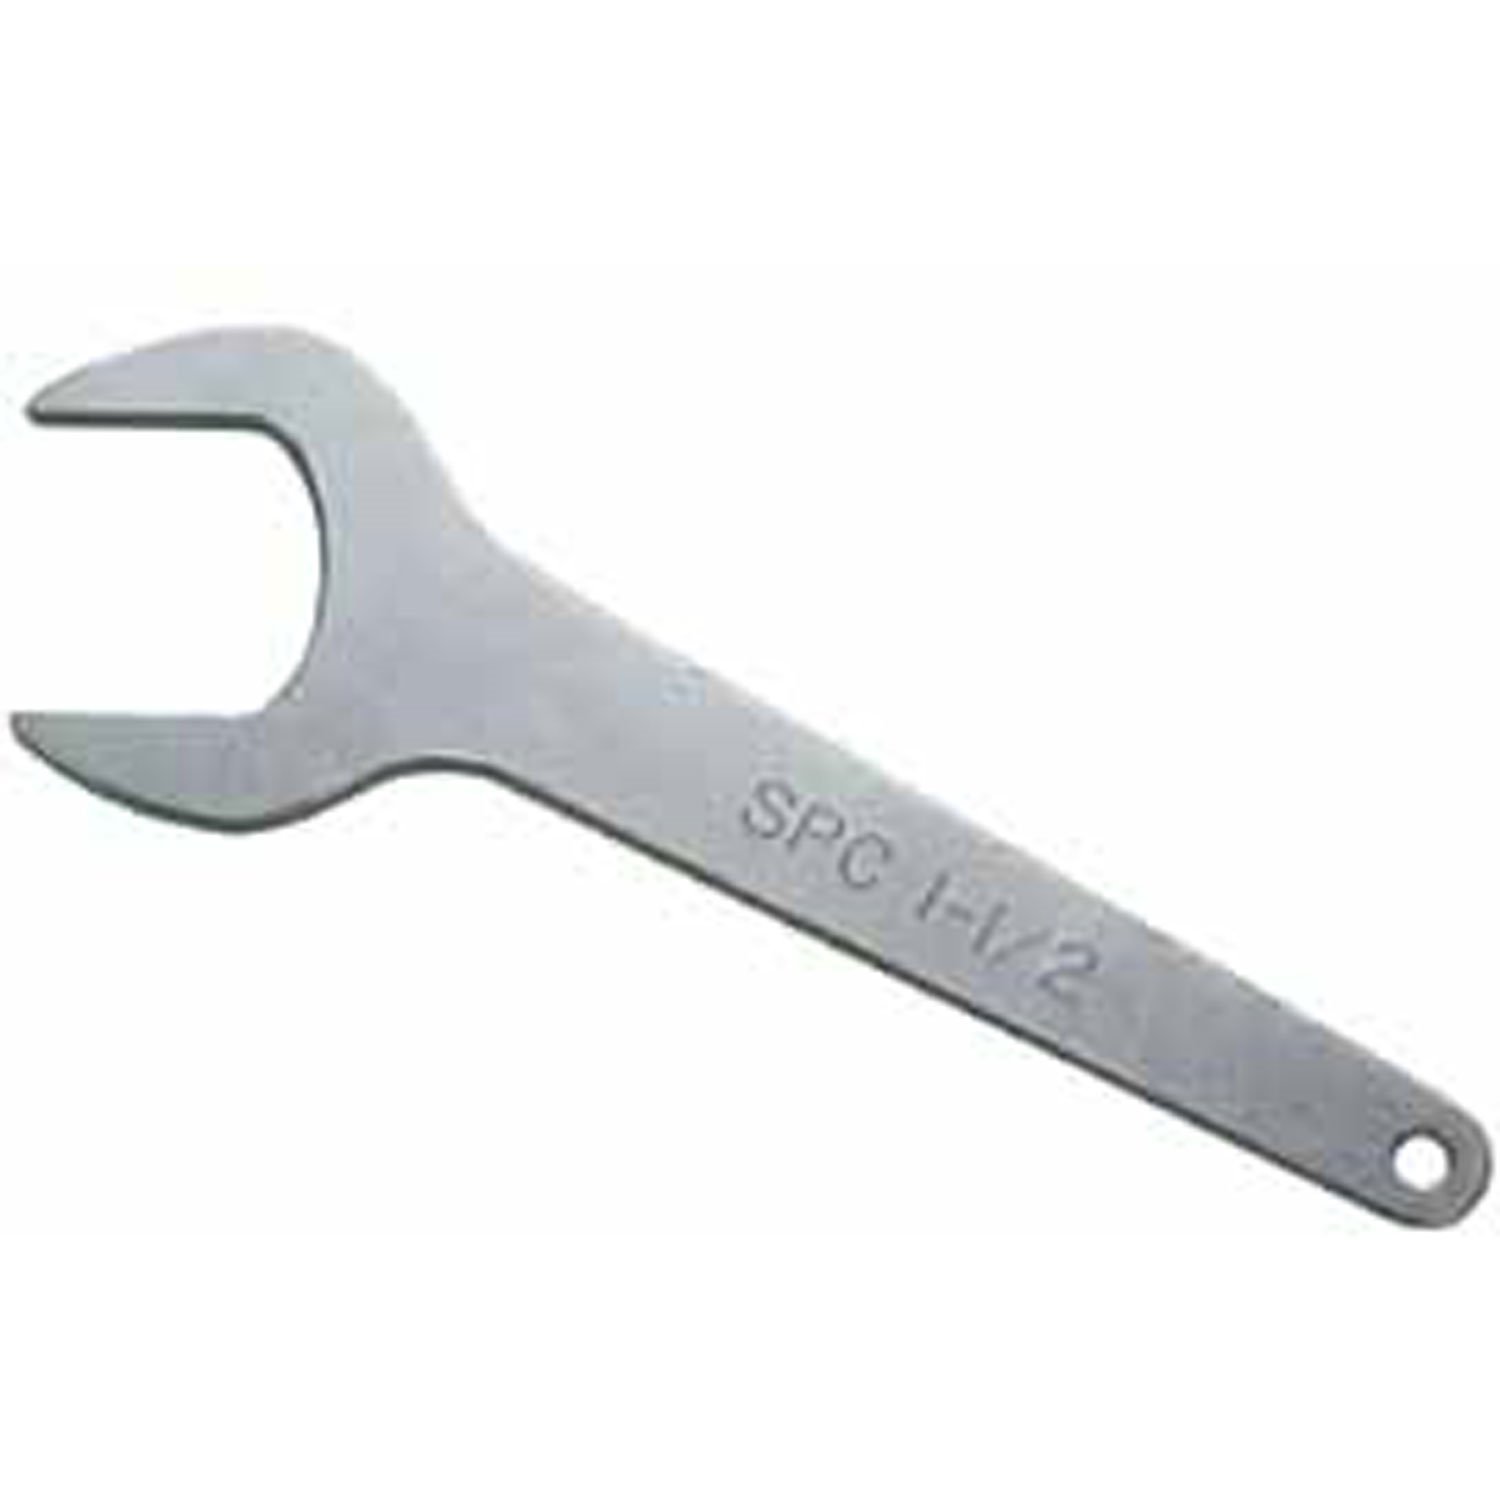 1-1/2 OPEN END WRENCH